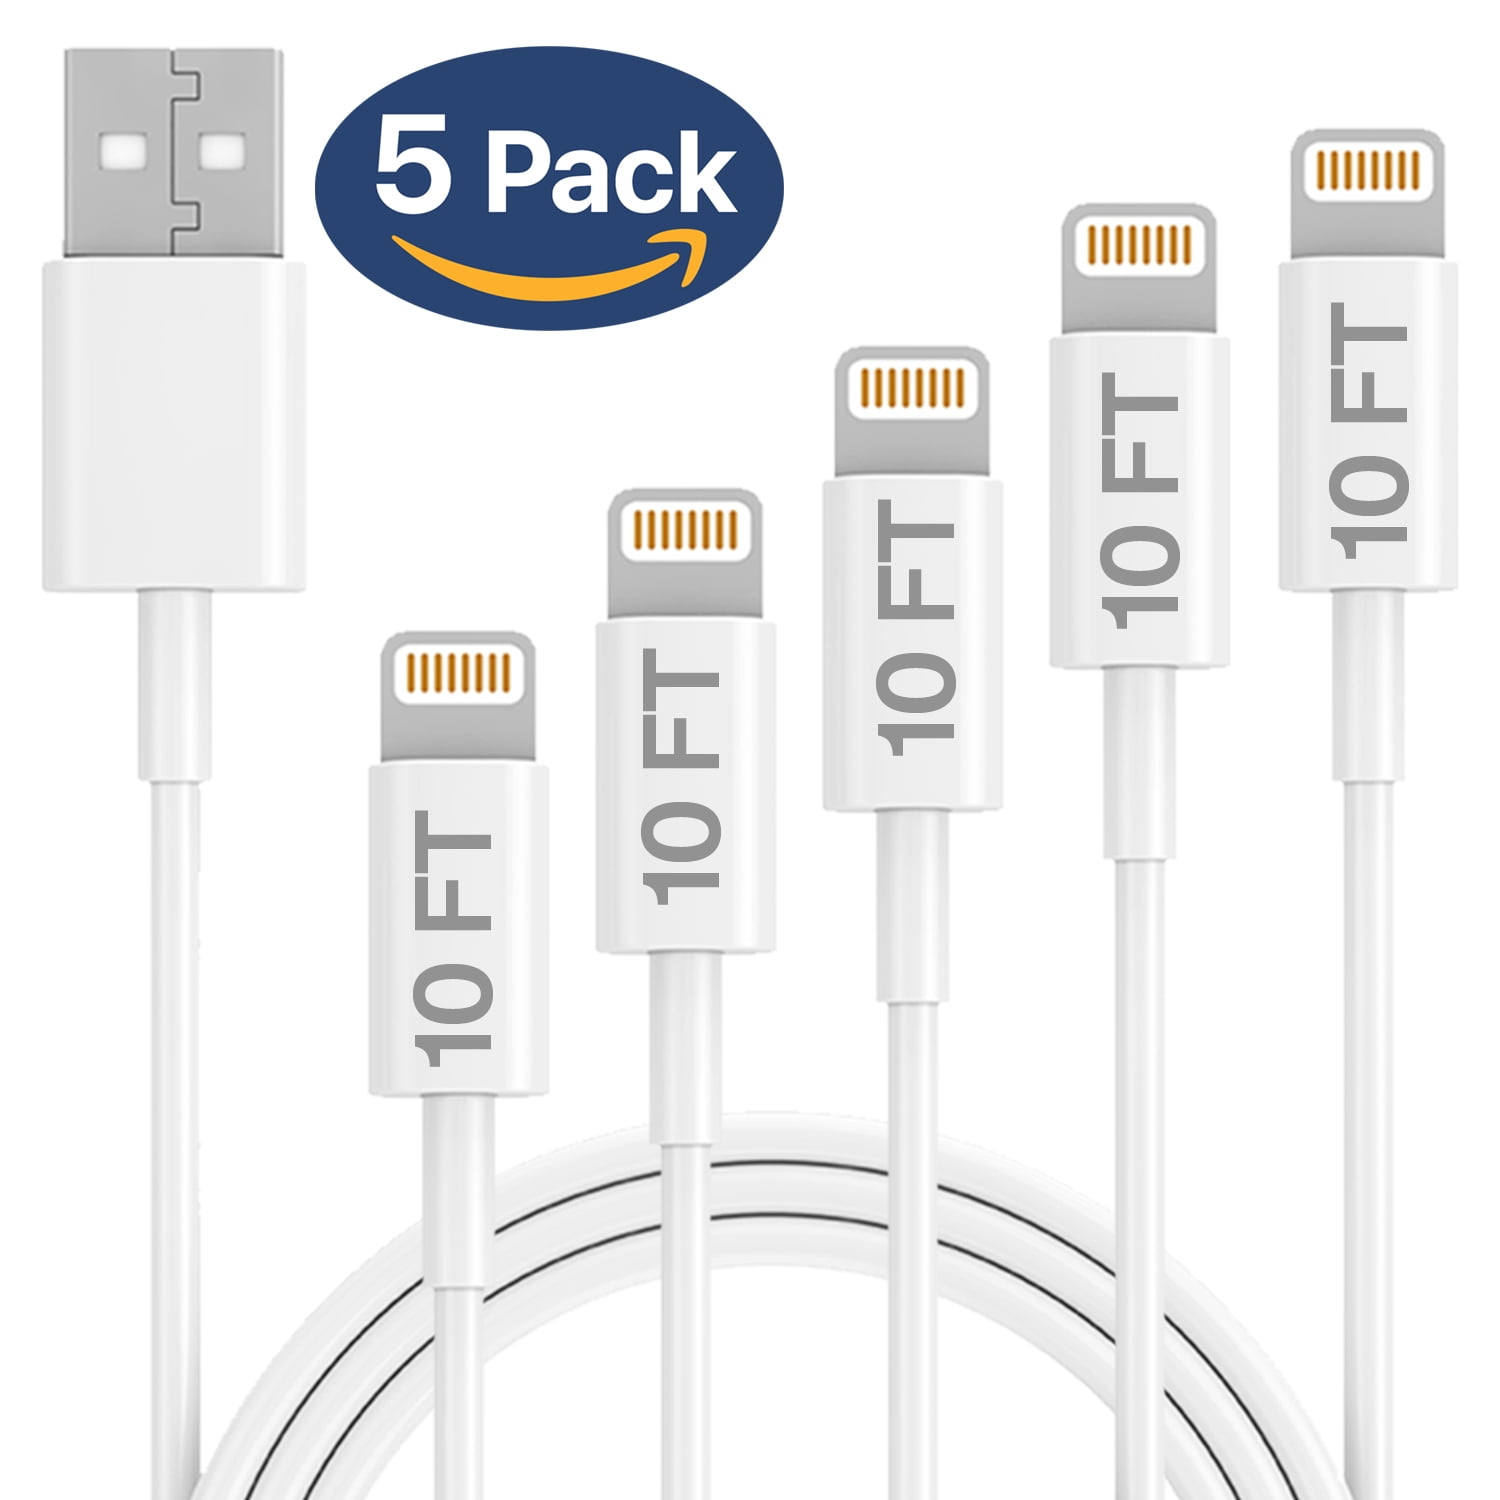 iPhone Charger Lightning Cable Infinite Power 4 Pack 6FT USB Cable Charging Cord Compatible with Apple iPhone Xs,Xs Max,XR,X,8,8 Plus,7,7 Plus,6S,6S Plus,iPad Air,Mini/iPod Touch/Case 